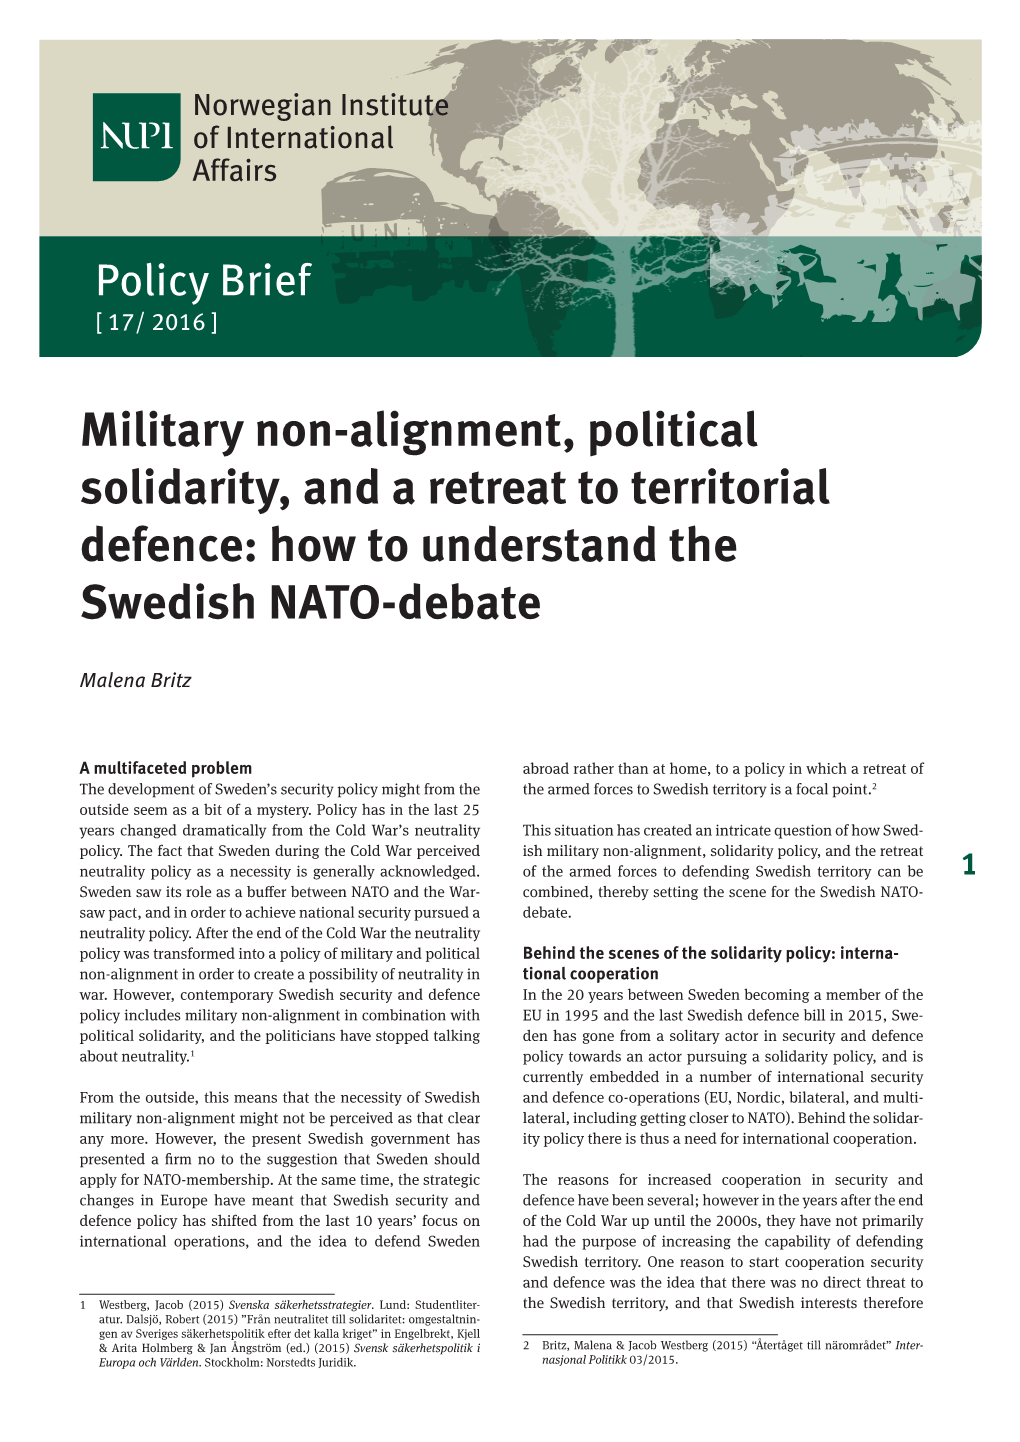 Military Non-Alignment, Political Solidarity, and a Retreat to Territorial Defence: How to Understand the Swedish NATO-Debate